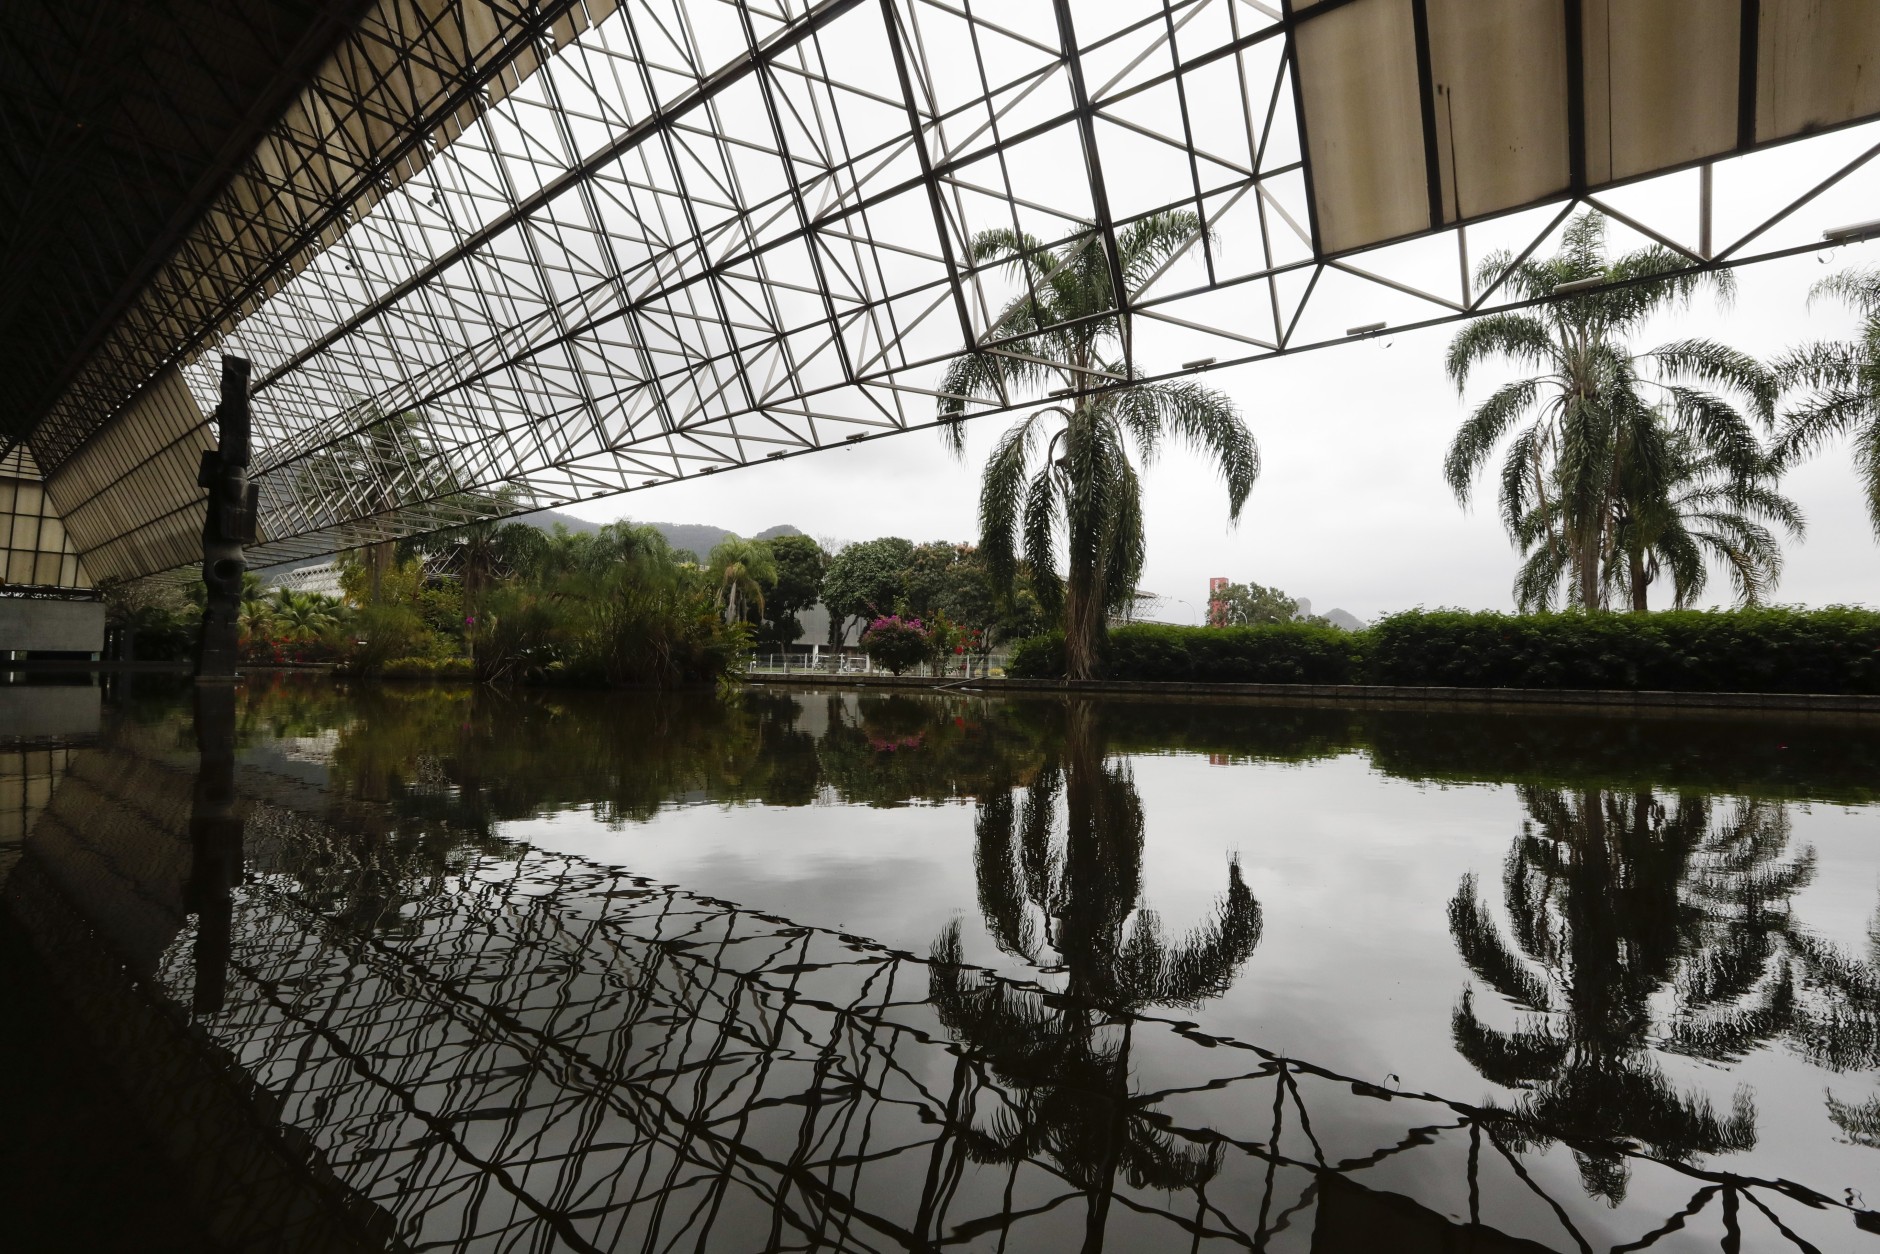 A reflecting pool is shown at Pavilion 5 ahead of the 2016 Summer Olympics in Rio de Janeiro, Brazil, Wednesday, Aug. 3, 2016. (AP Photo/Frank Franklin II)